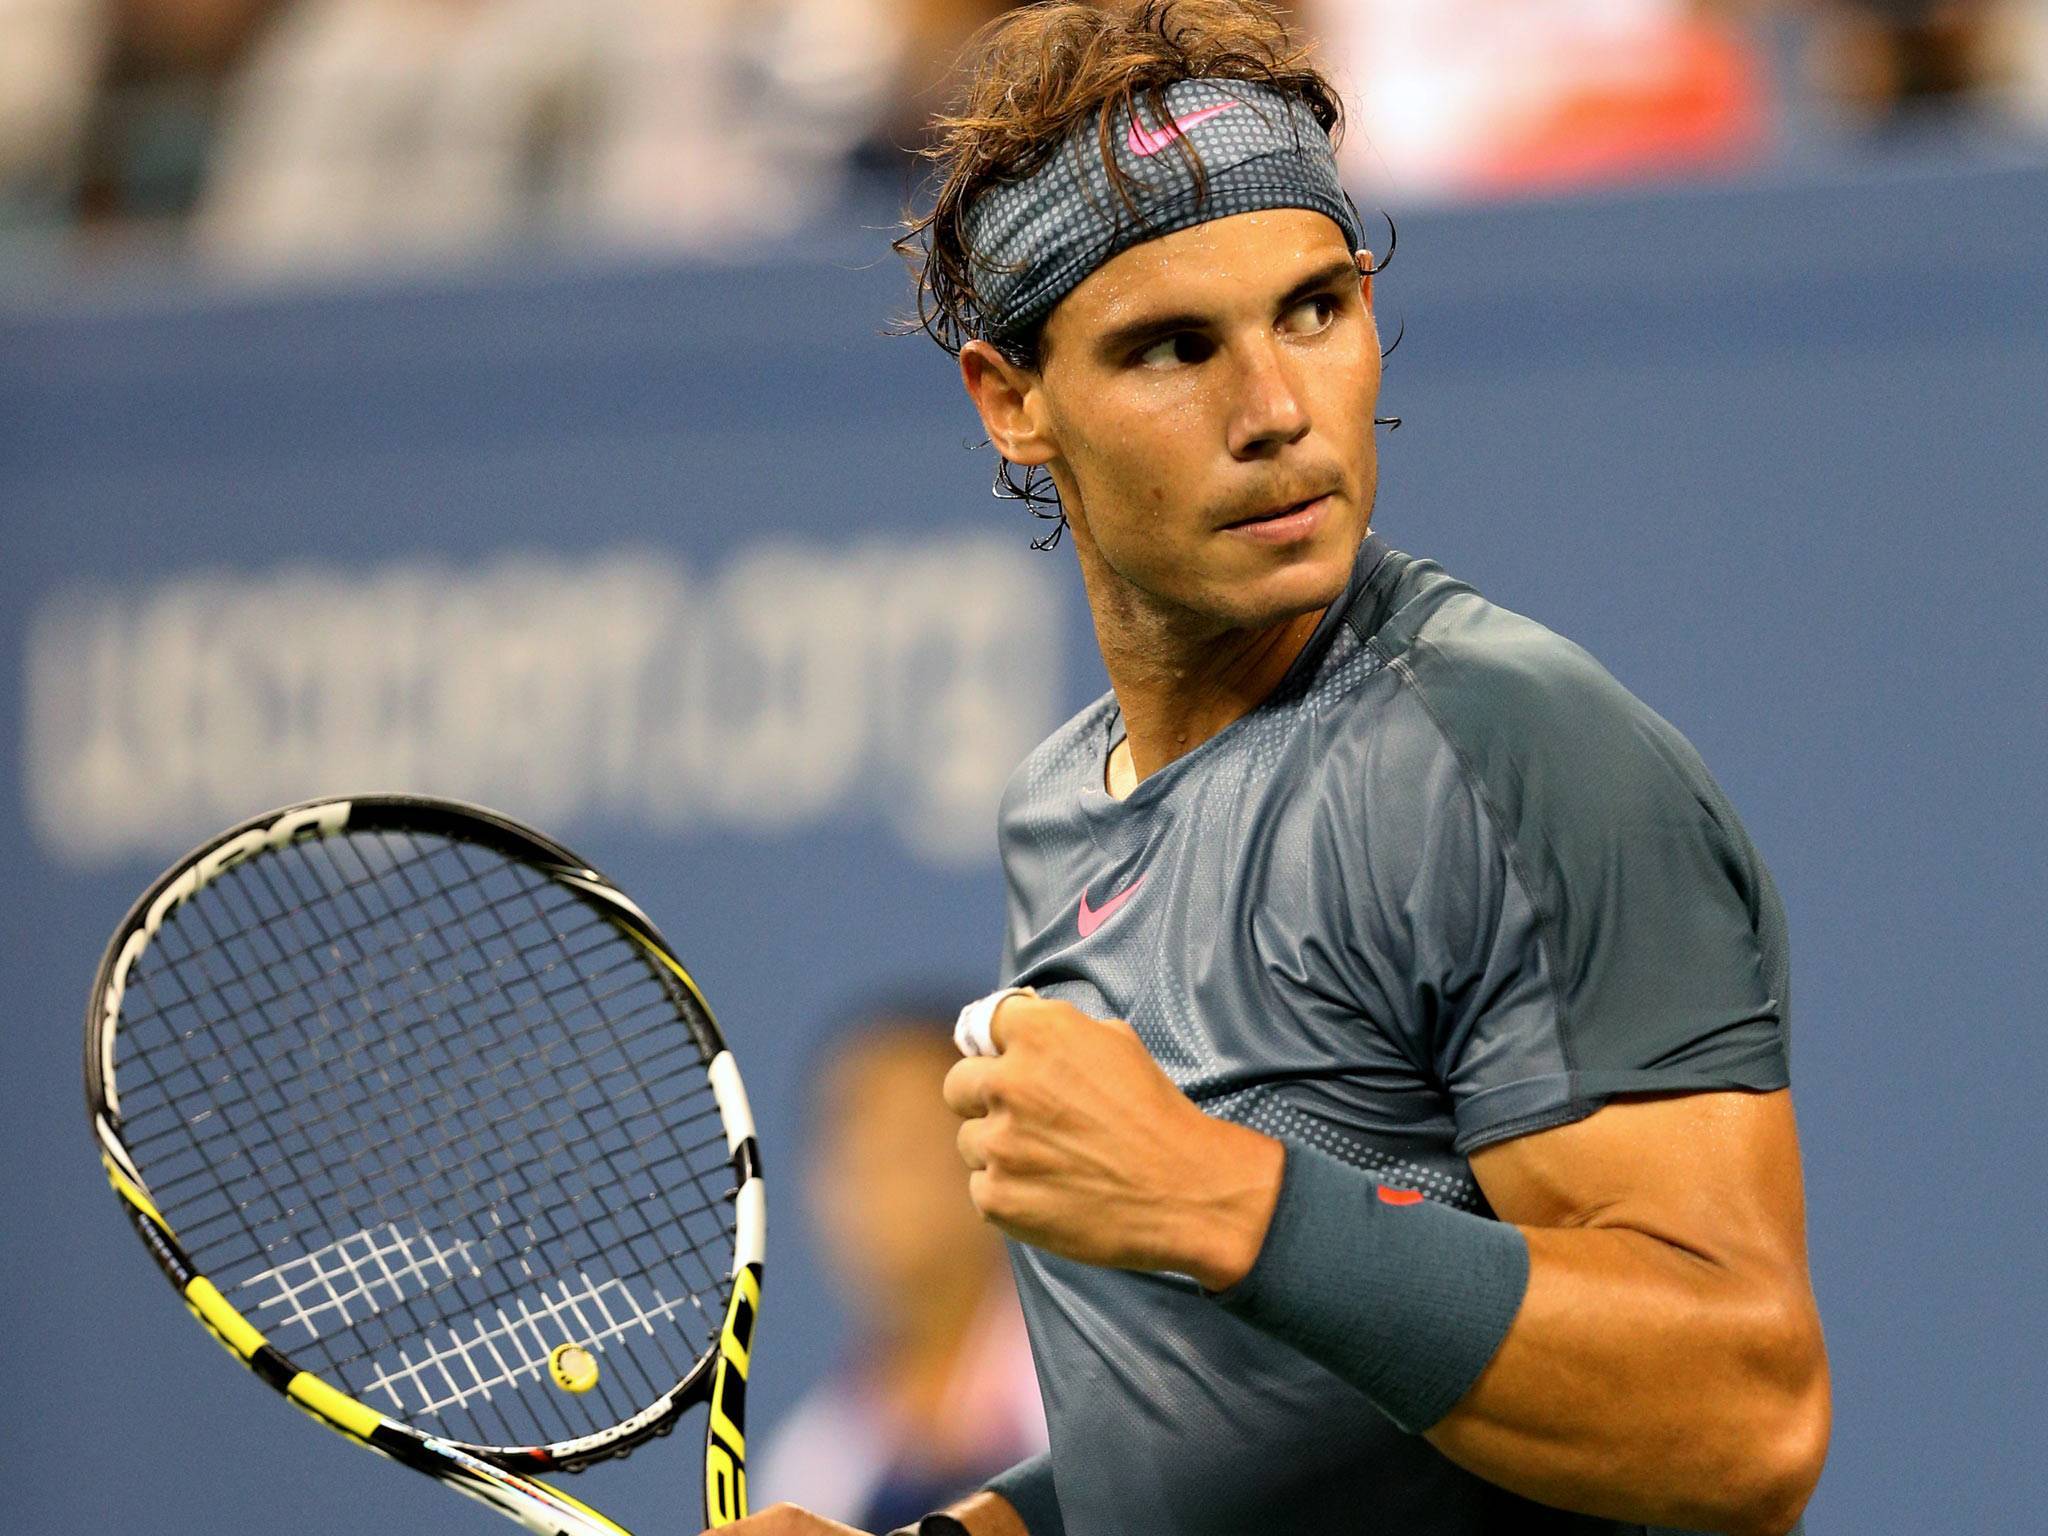 Rafael Nadal No Longer Odds Favorite for 2015 French Open | Movie TV Tech Geeks News